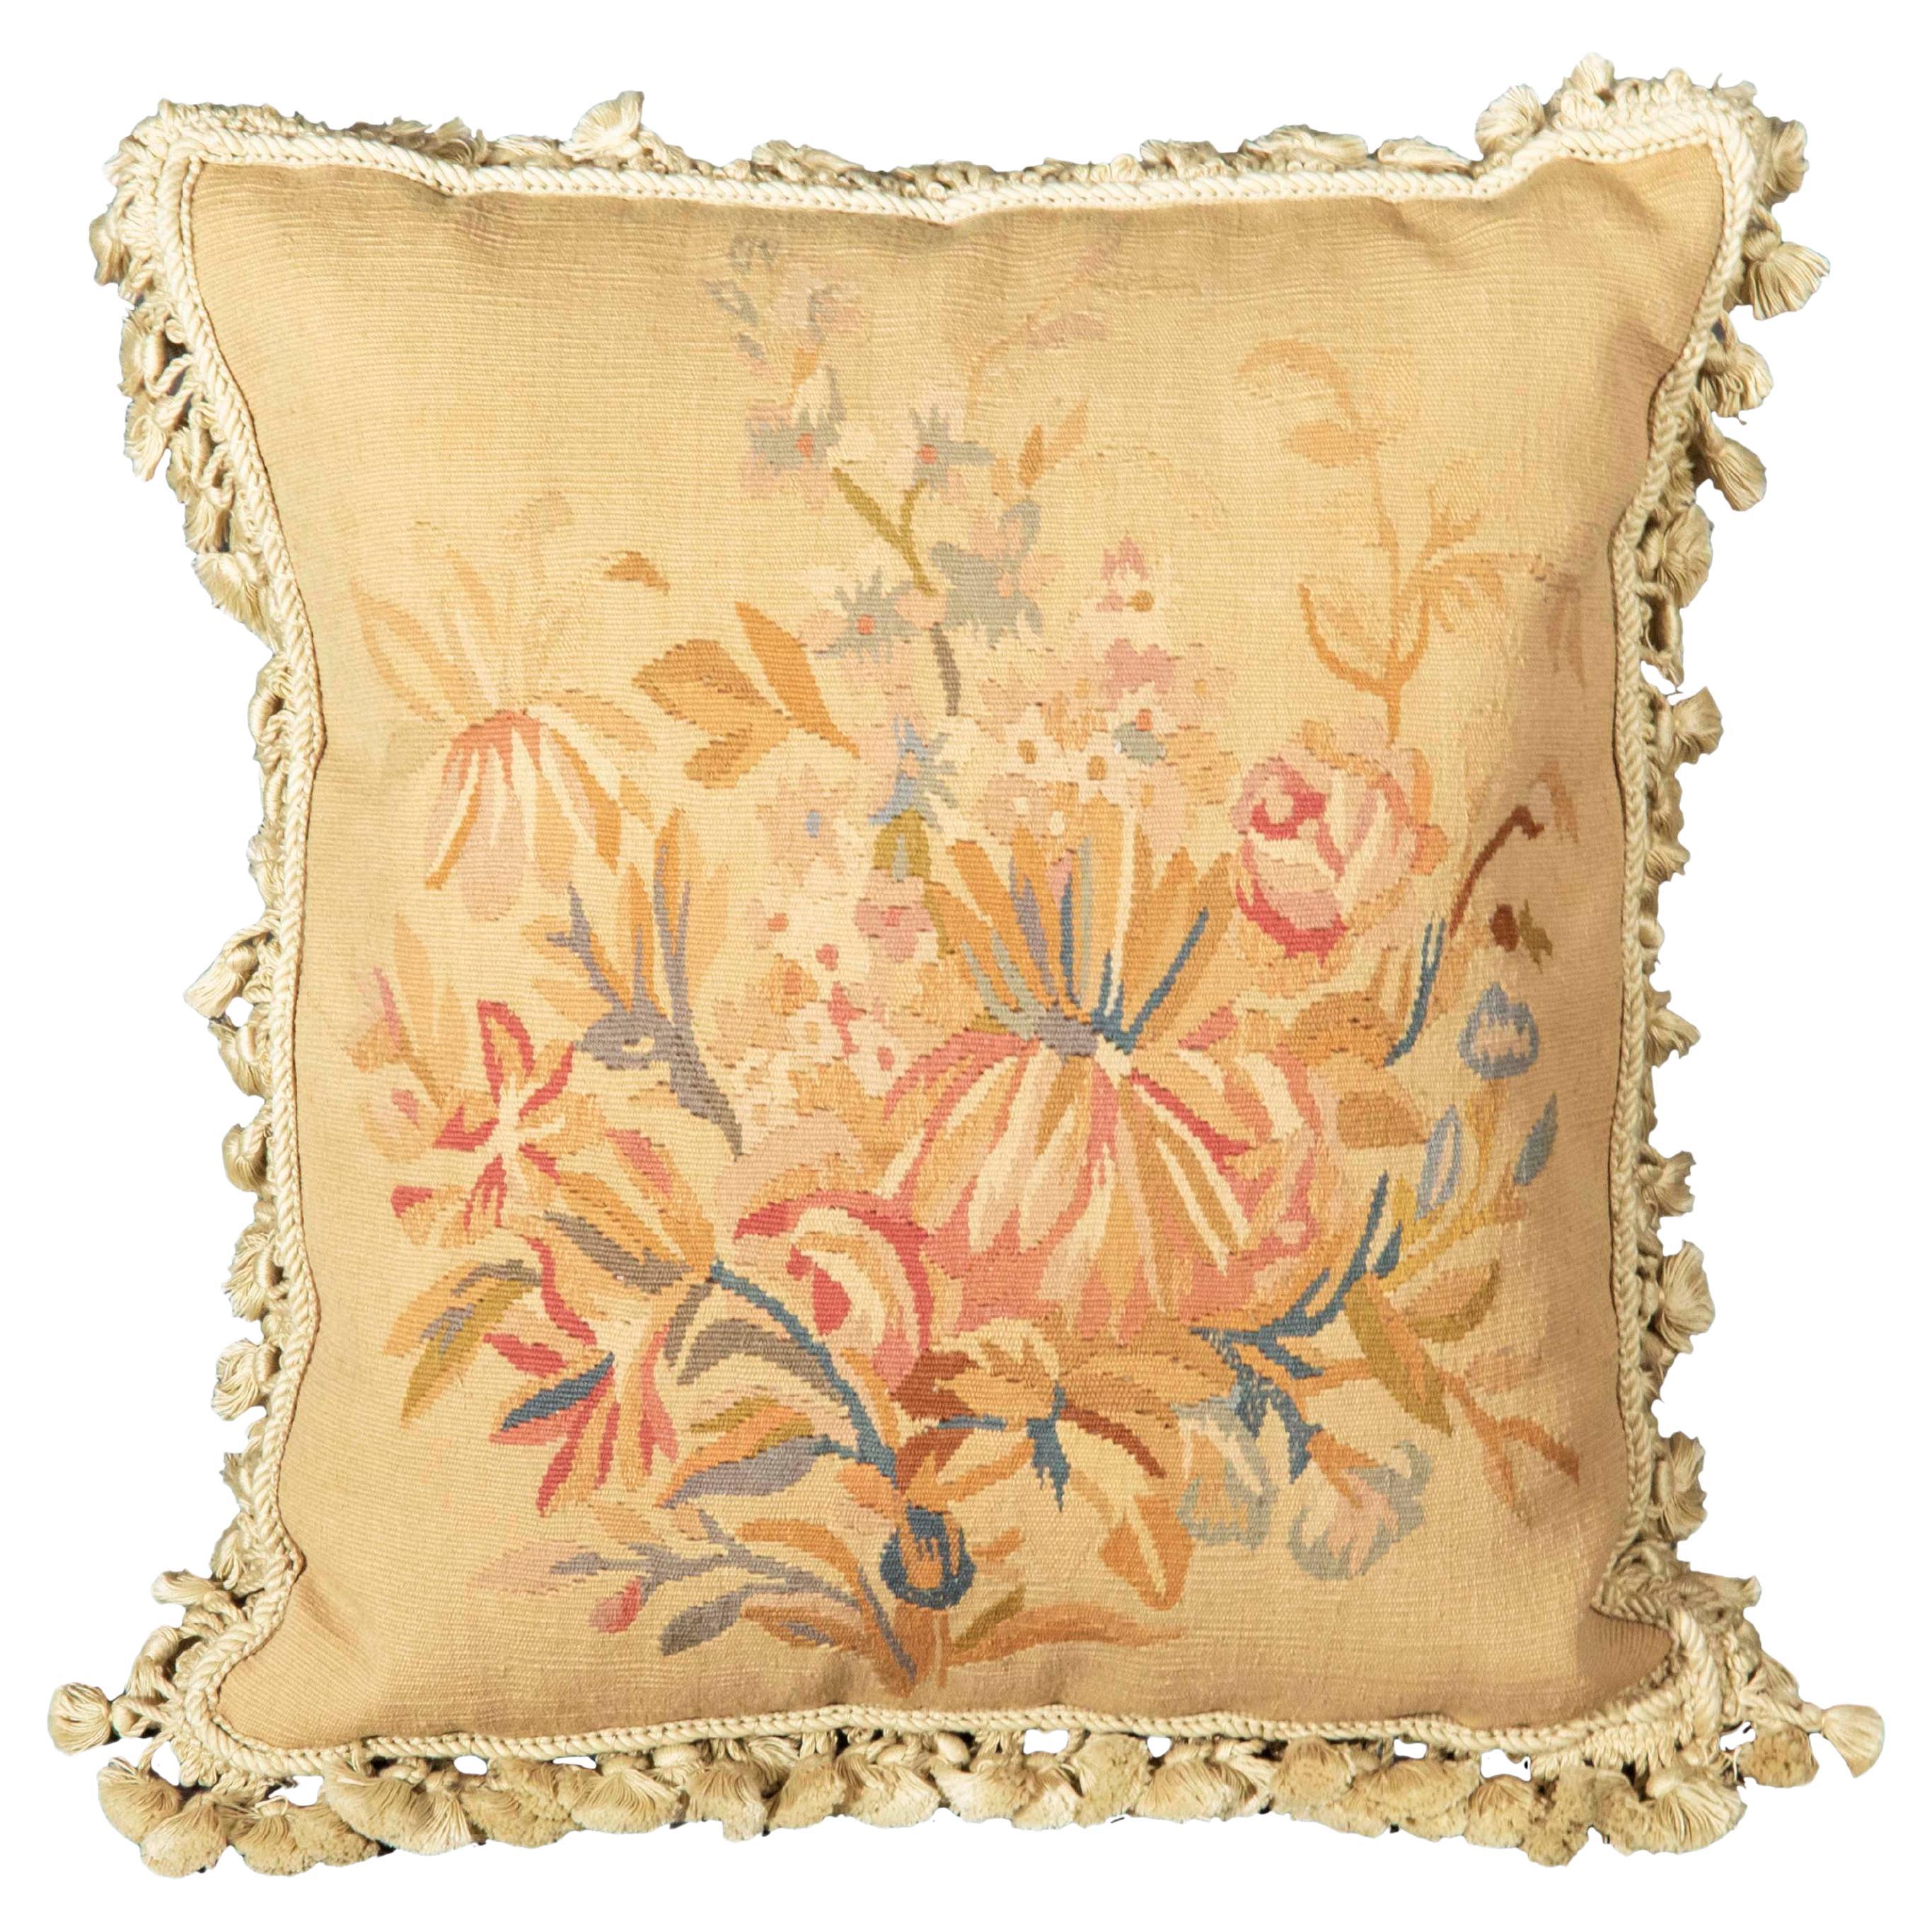 Antique Tapestry Cushion 19th Century Floral Design